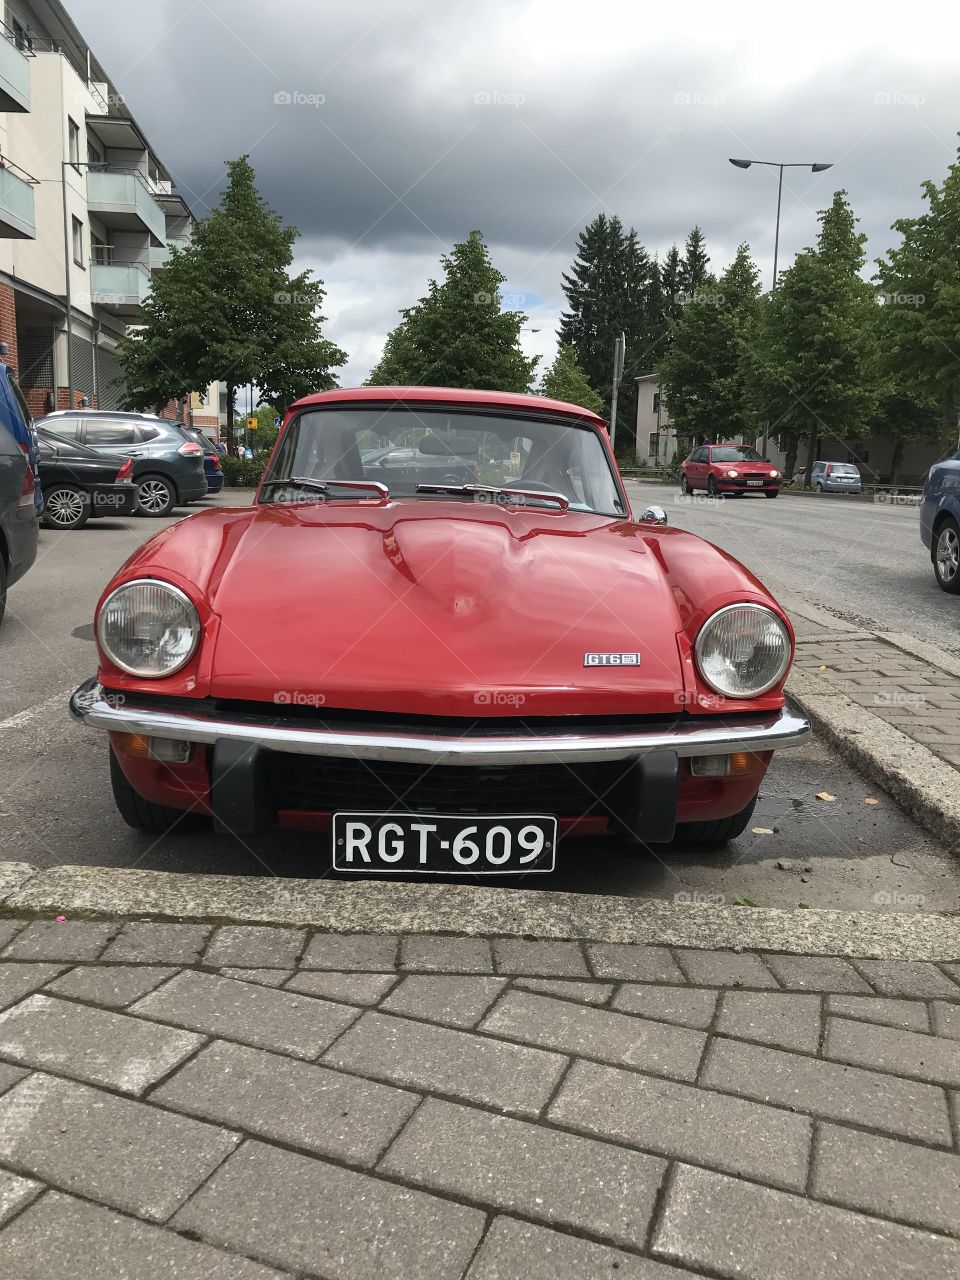    On a quiet and crowded street of the border town of Imatra, this car was seen 🚗 😊 Imatra, Finland